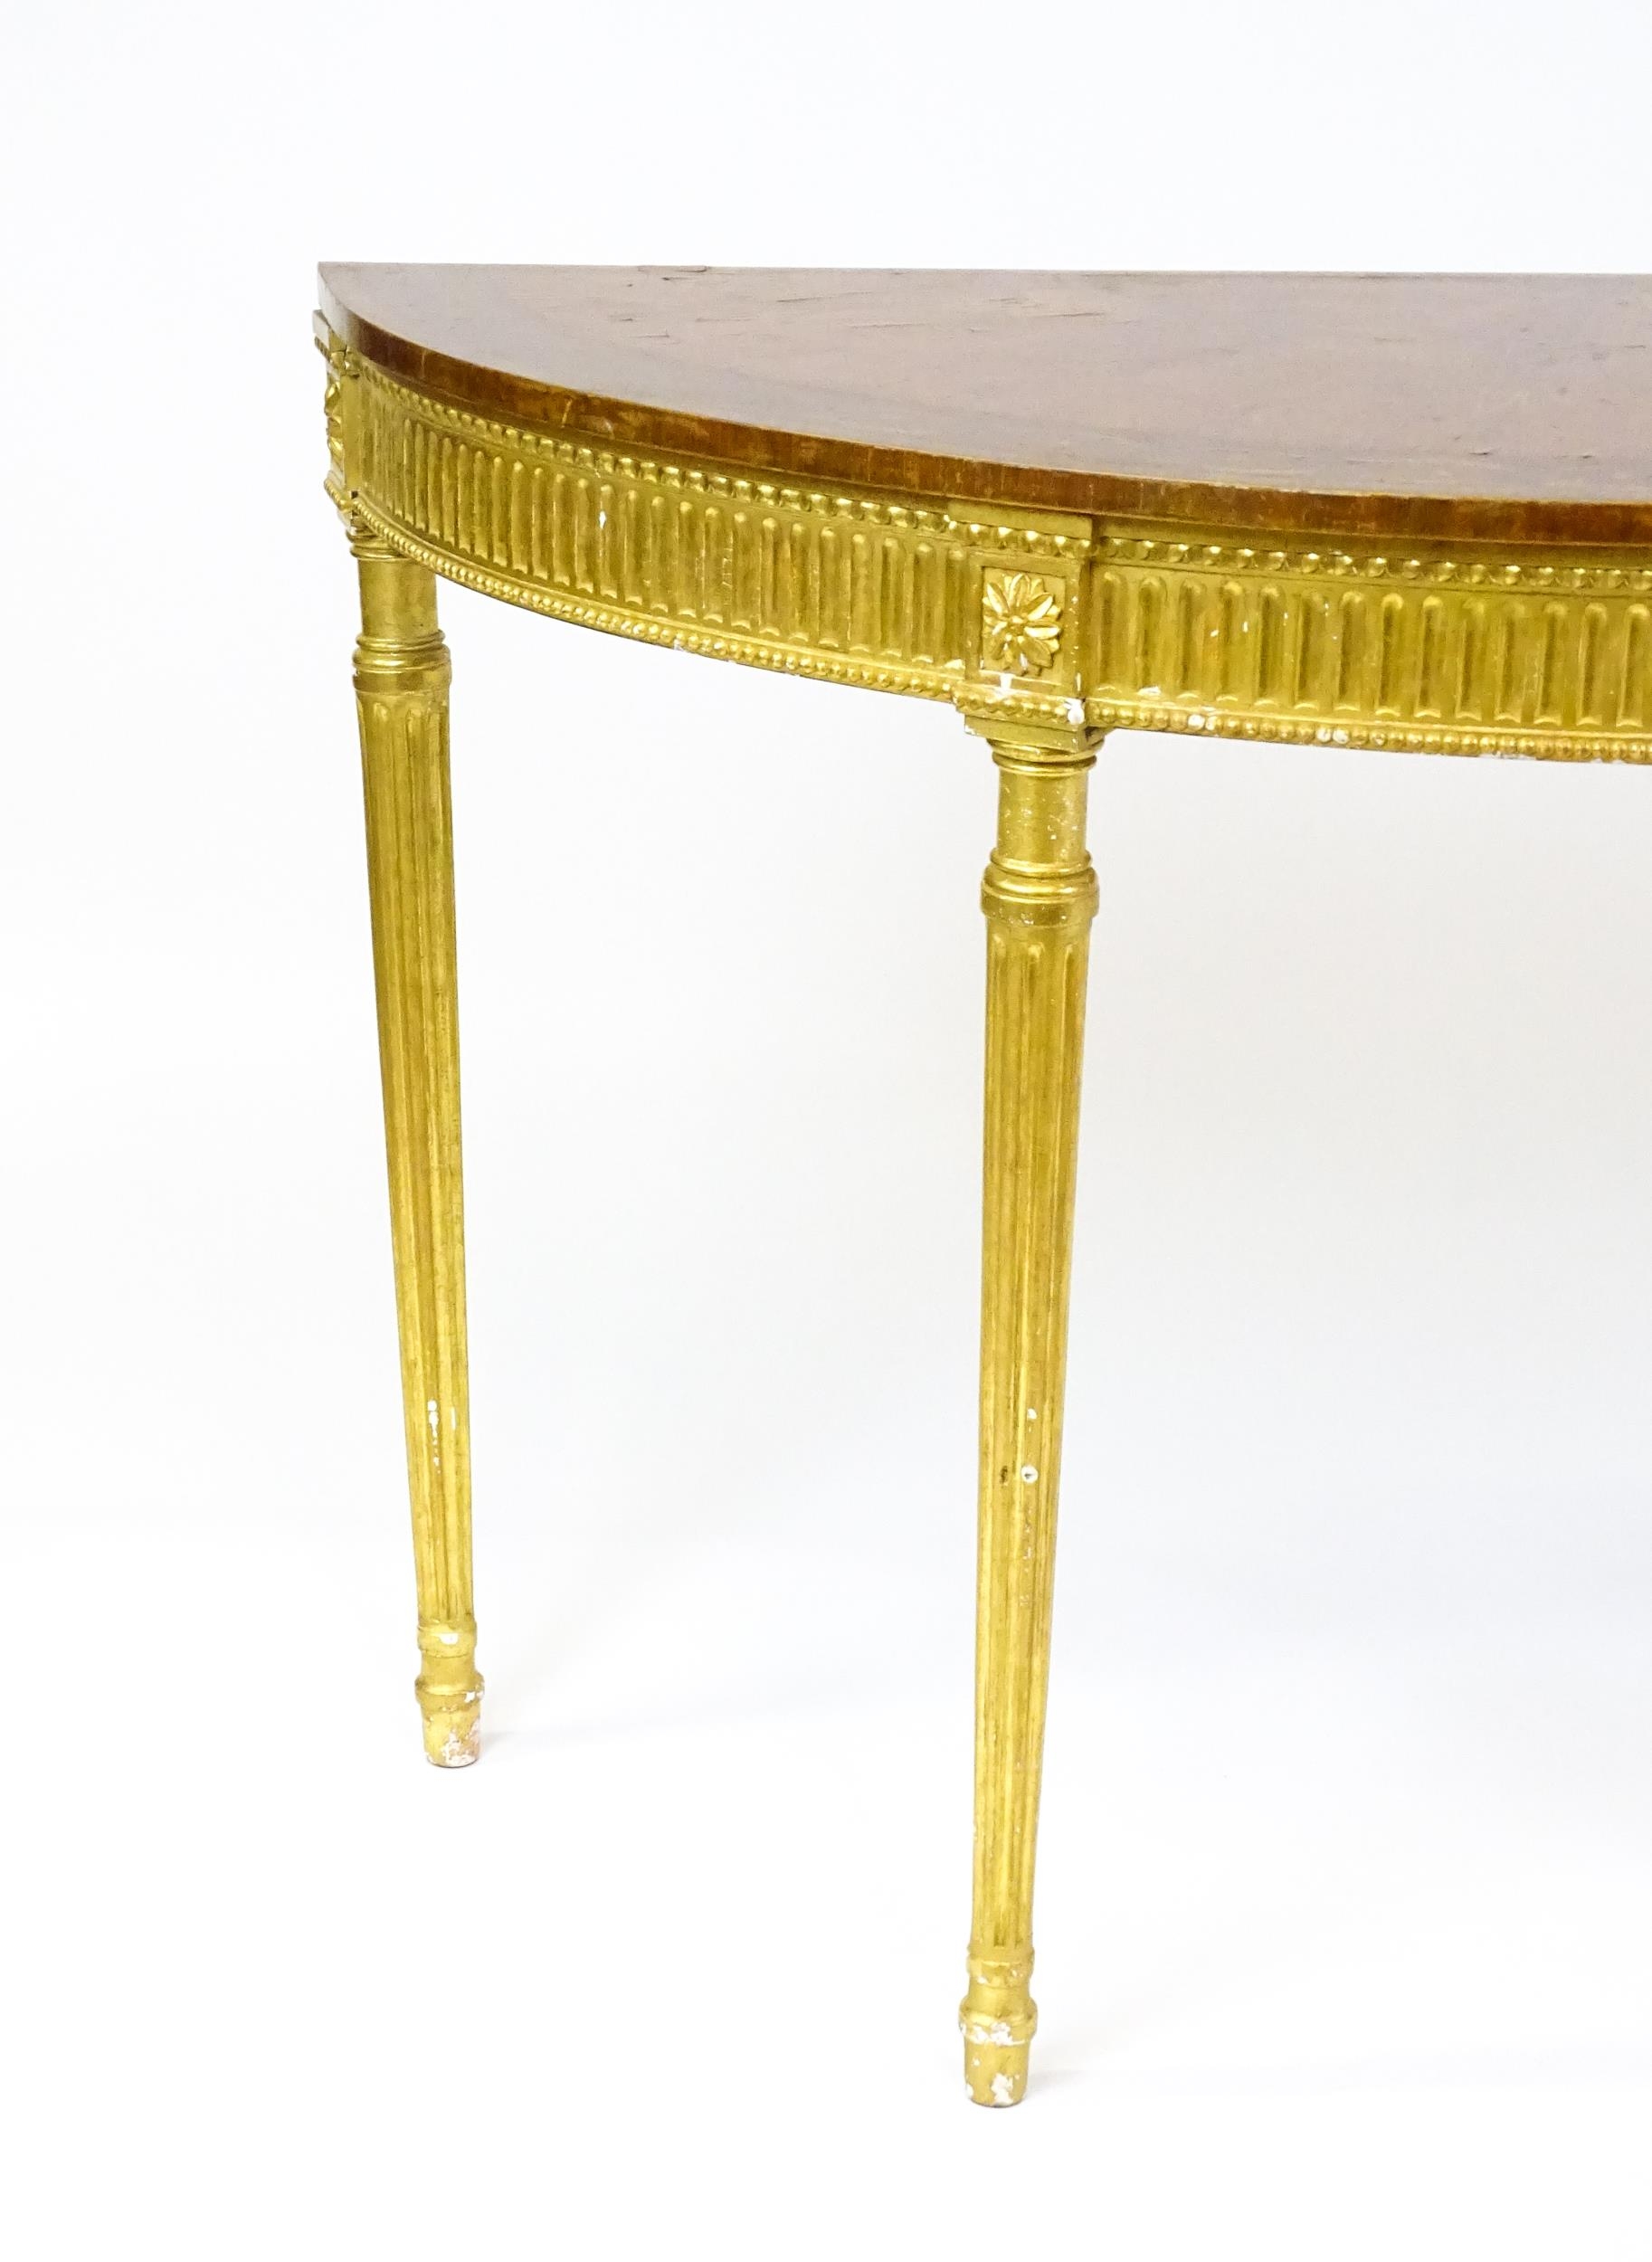 A demi lune console table with a marquetry inlaid top above a fluted frieze and moulded floral - Image 3 of 11